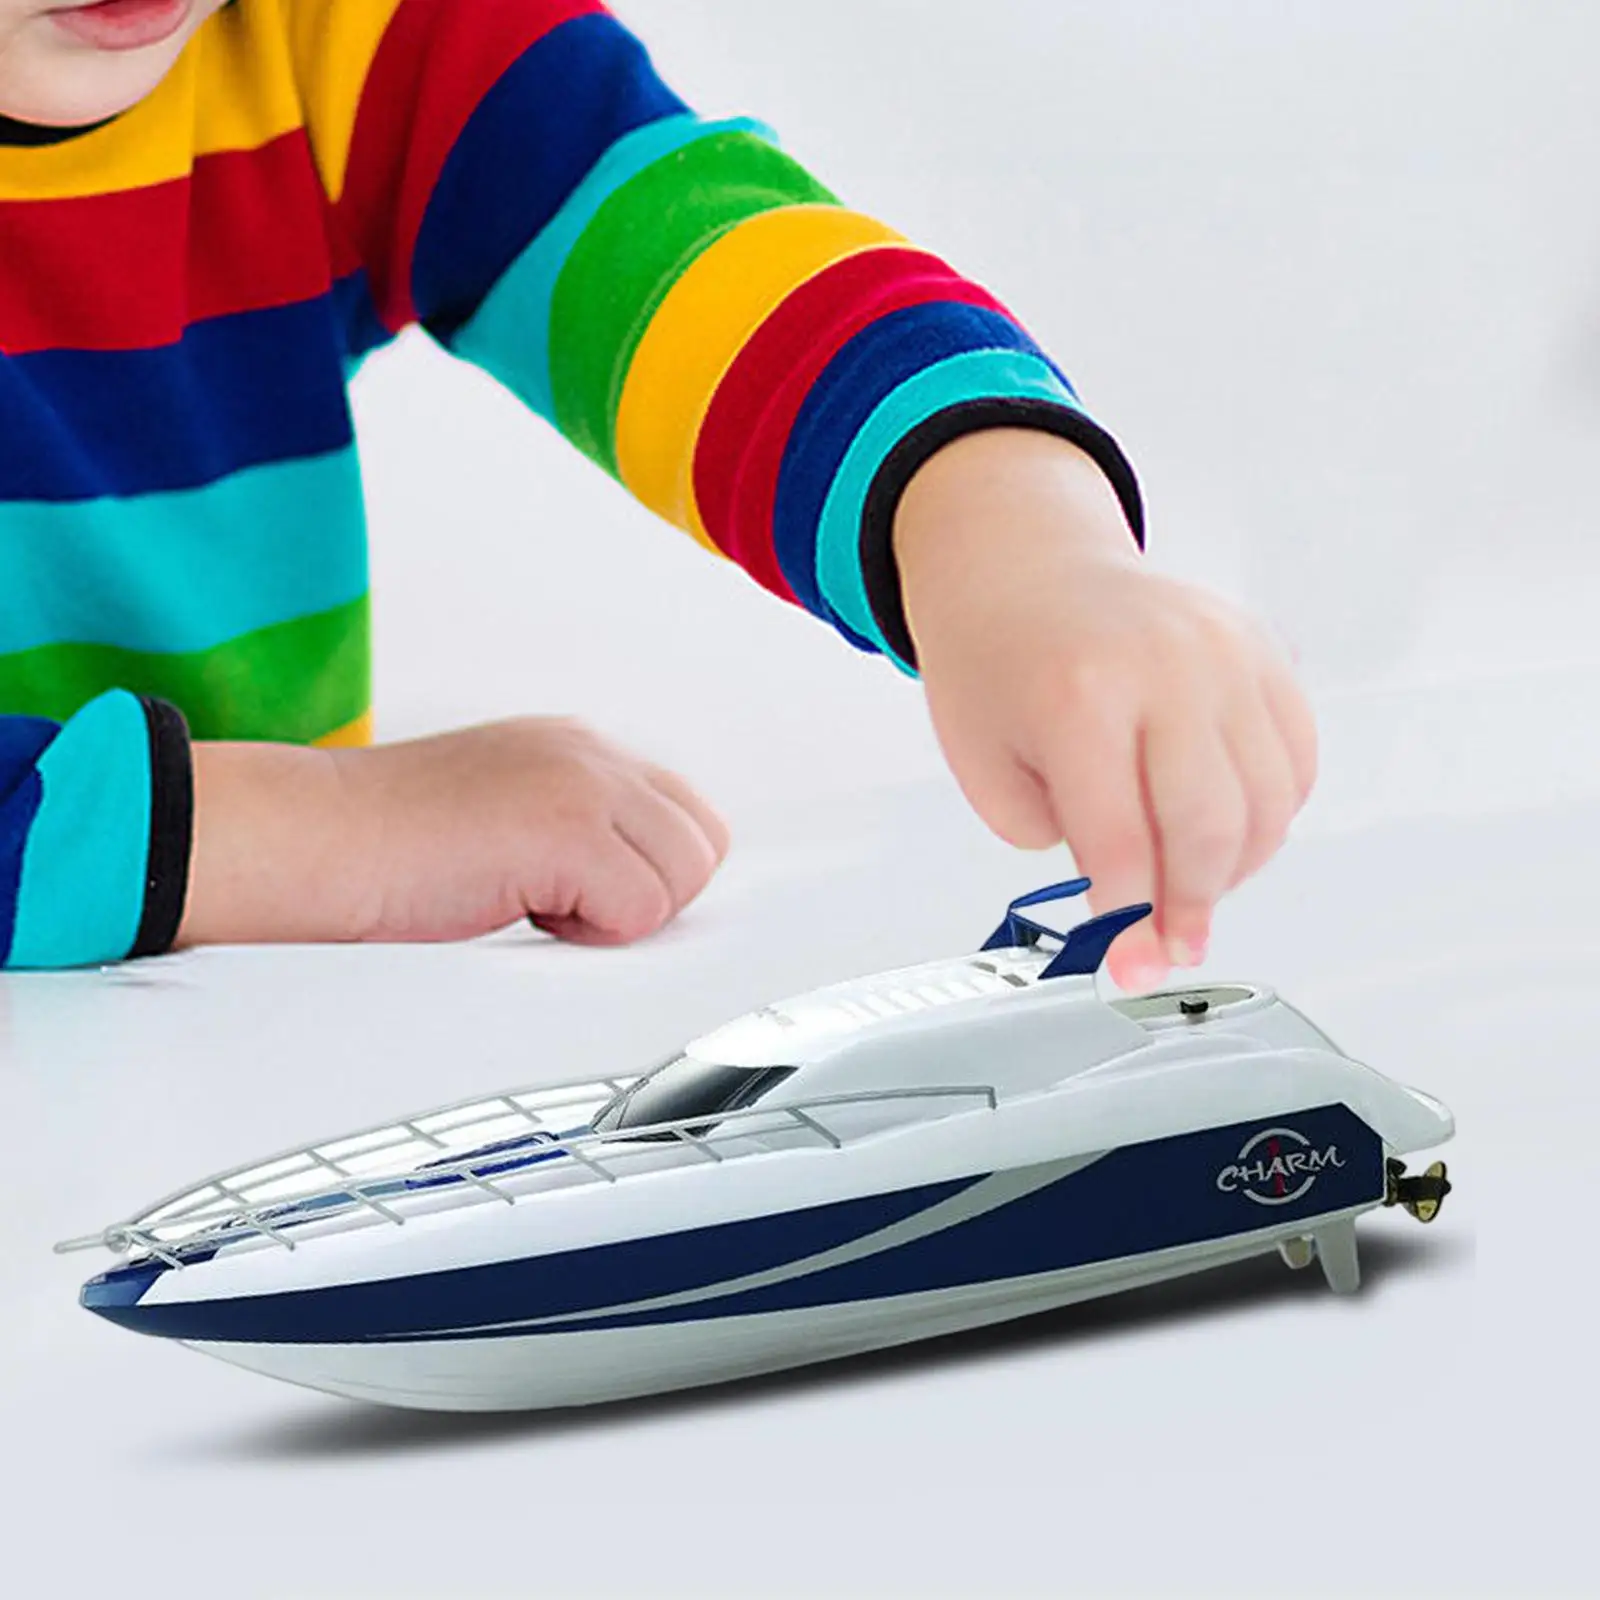 Portable Remote Control Boat Toy Water Toy Boat USB Rechargeable Warship Model RC Boat for Kids Adults Children Boys Gifts